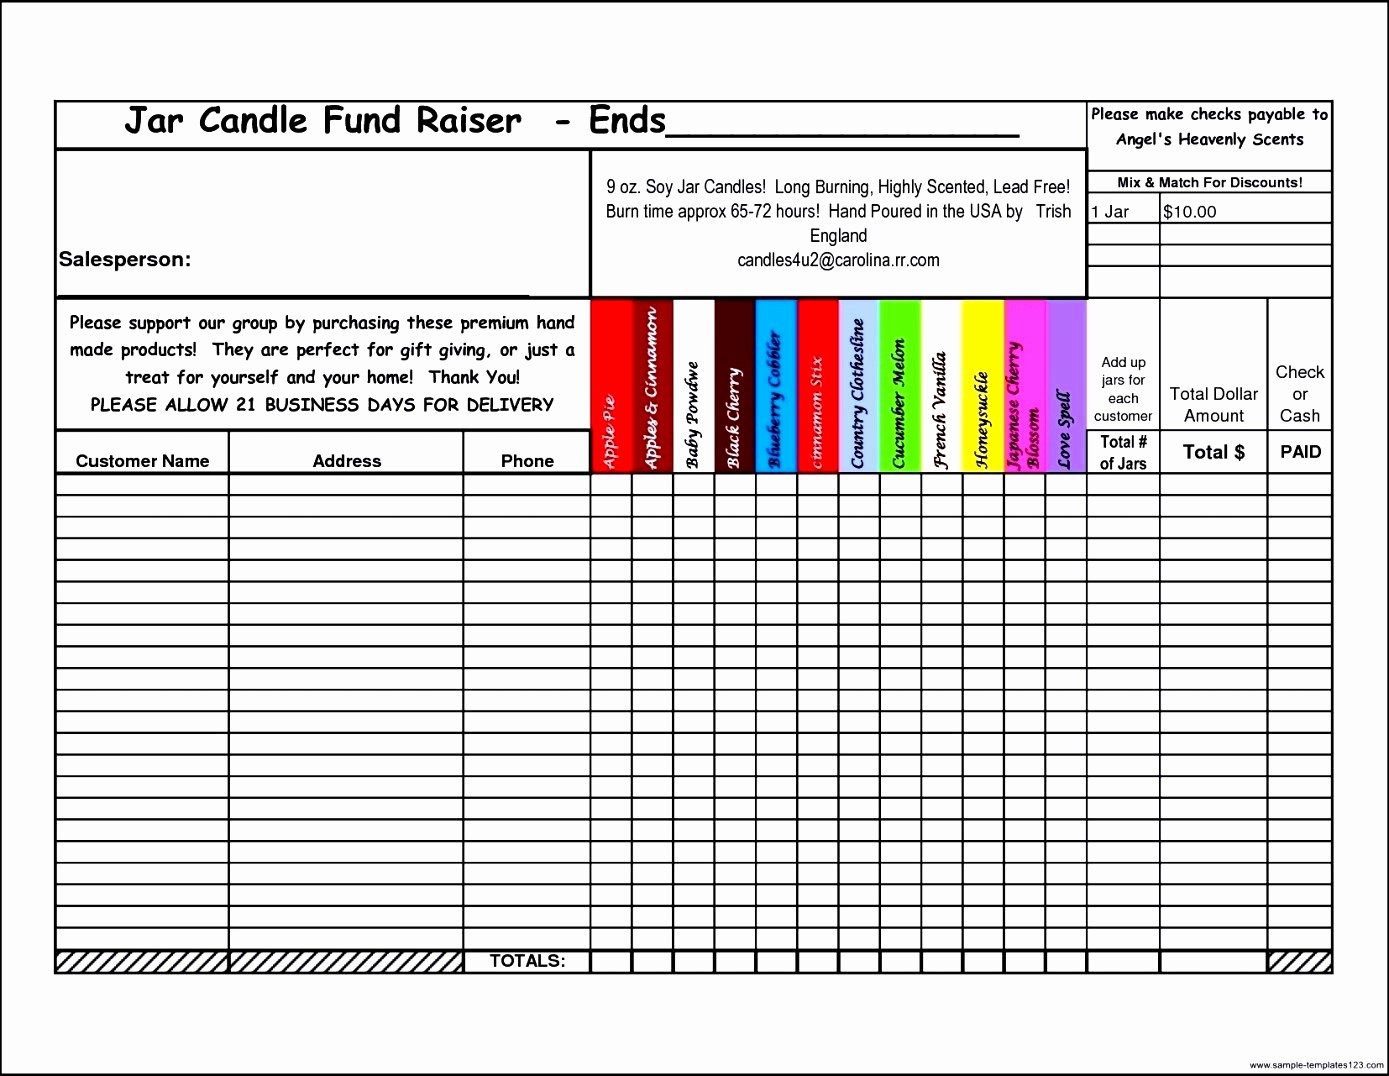 Fundraiser order form Template Excel Inspirational Fundraising forms Templates Free Sample Business Loan